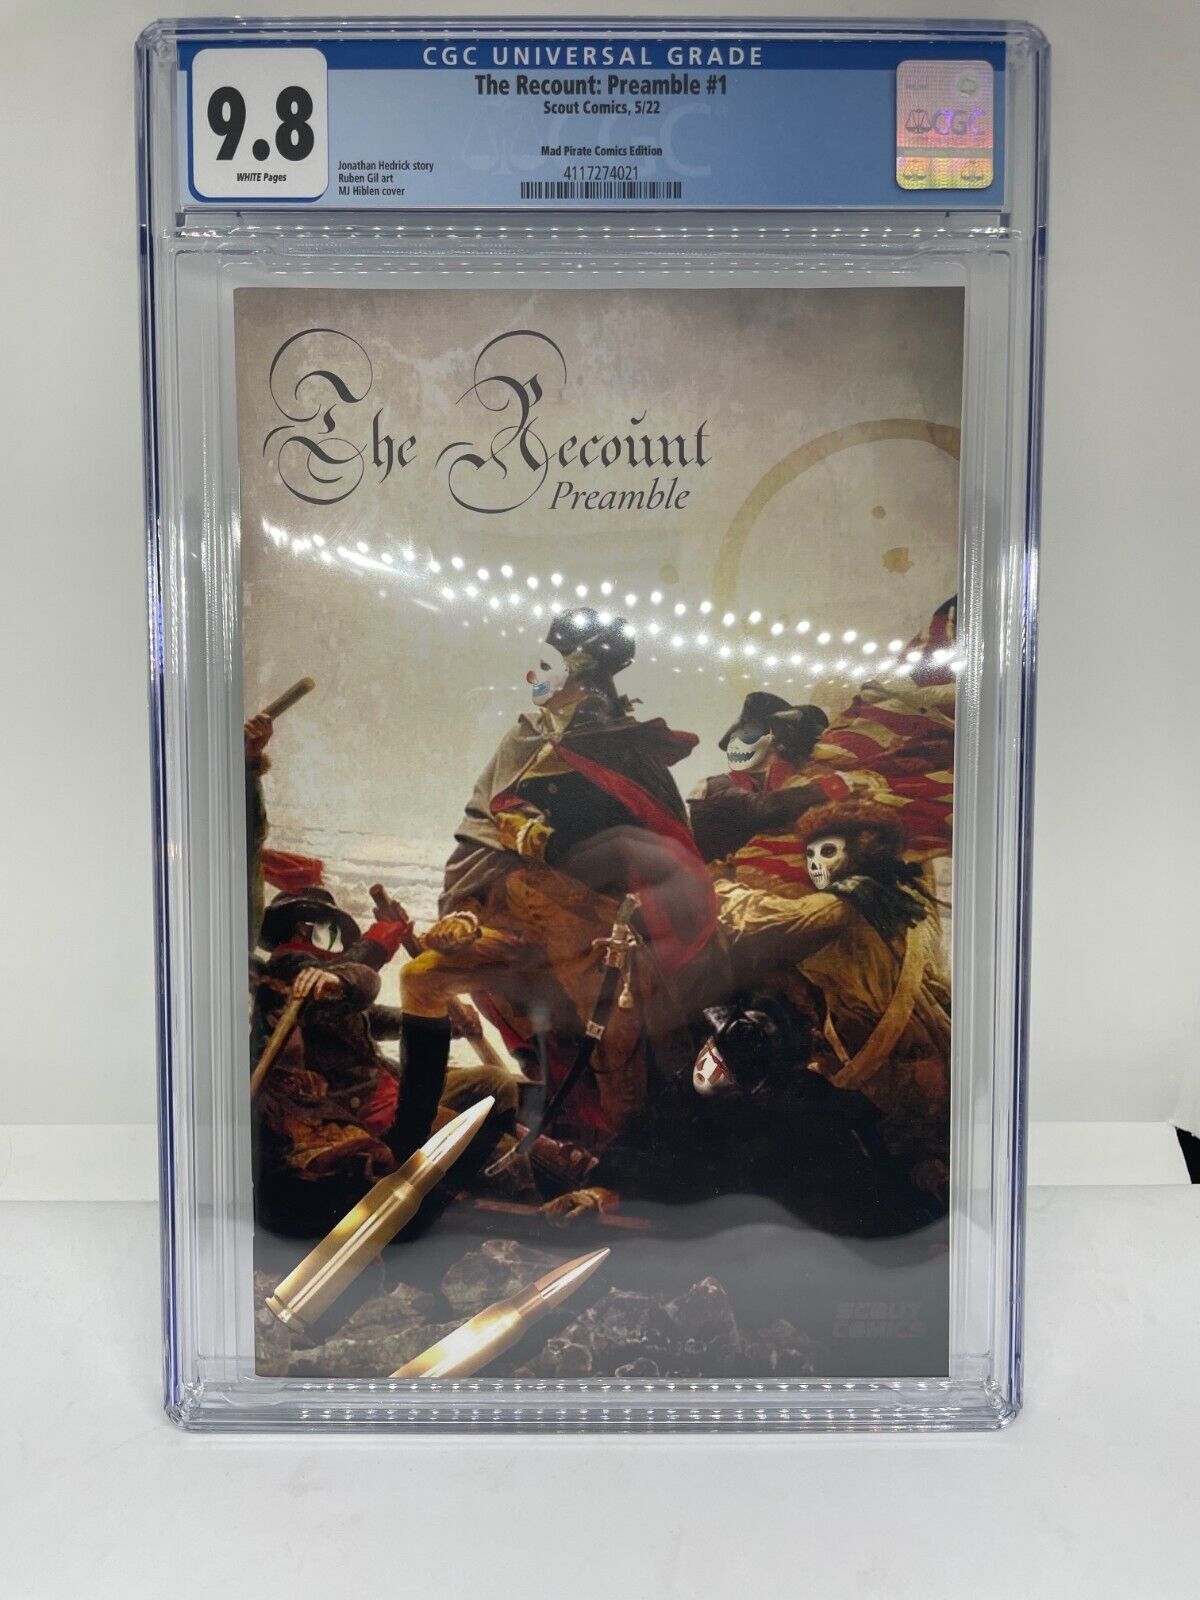 The Recount Preamble 1 CGC 9.8 White Pages 